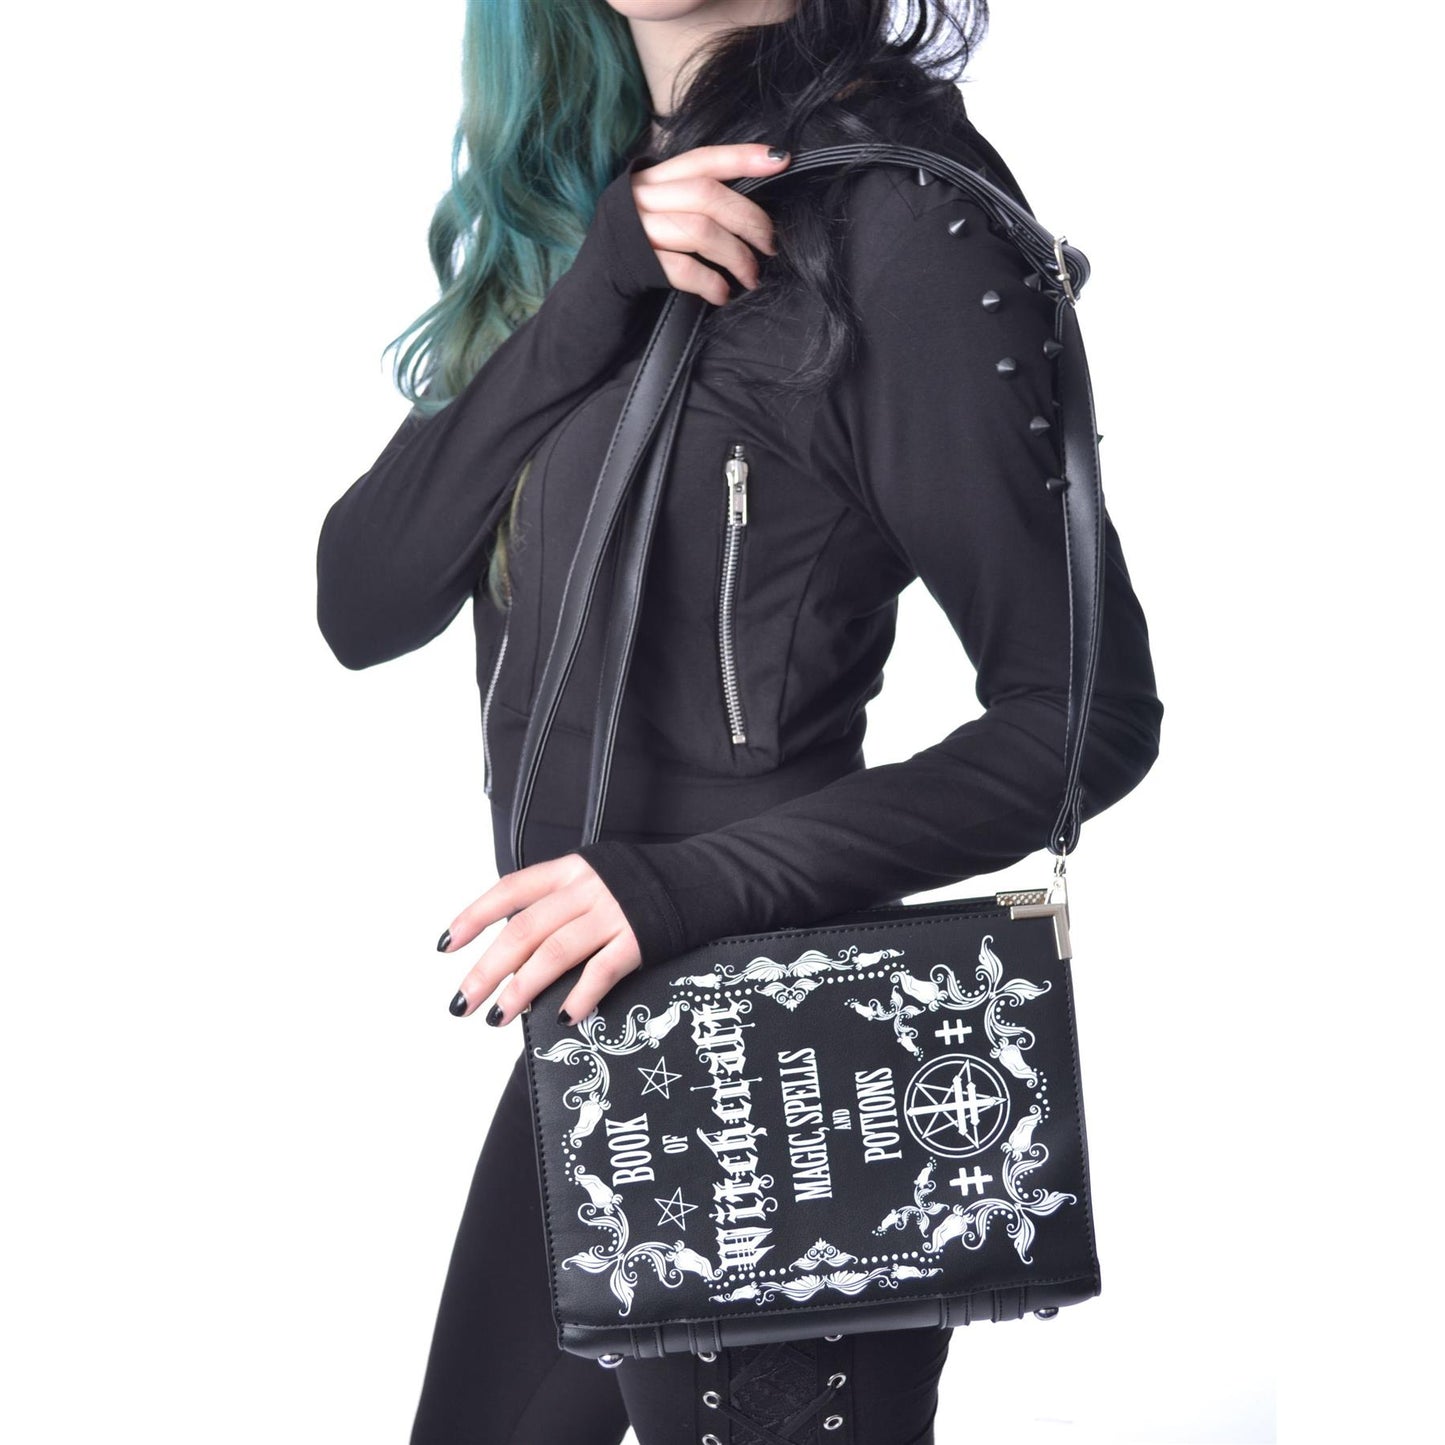 WITCHCRAFT BOOK BAG LADIES BLACK SIZE O/S